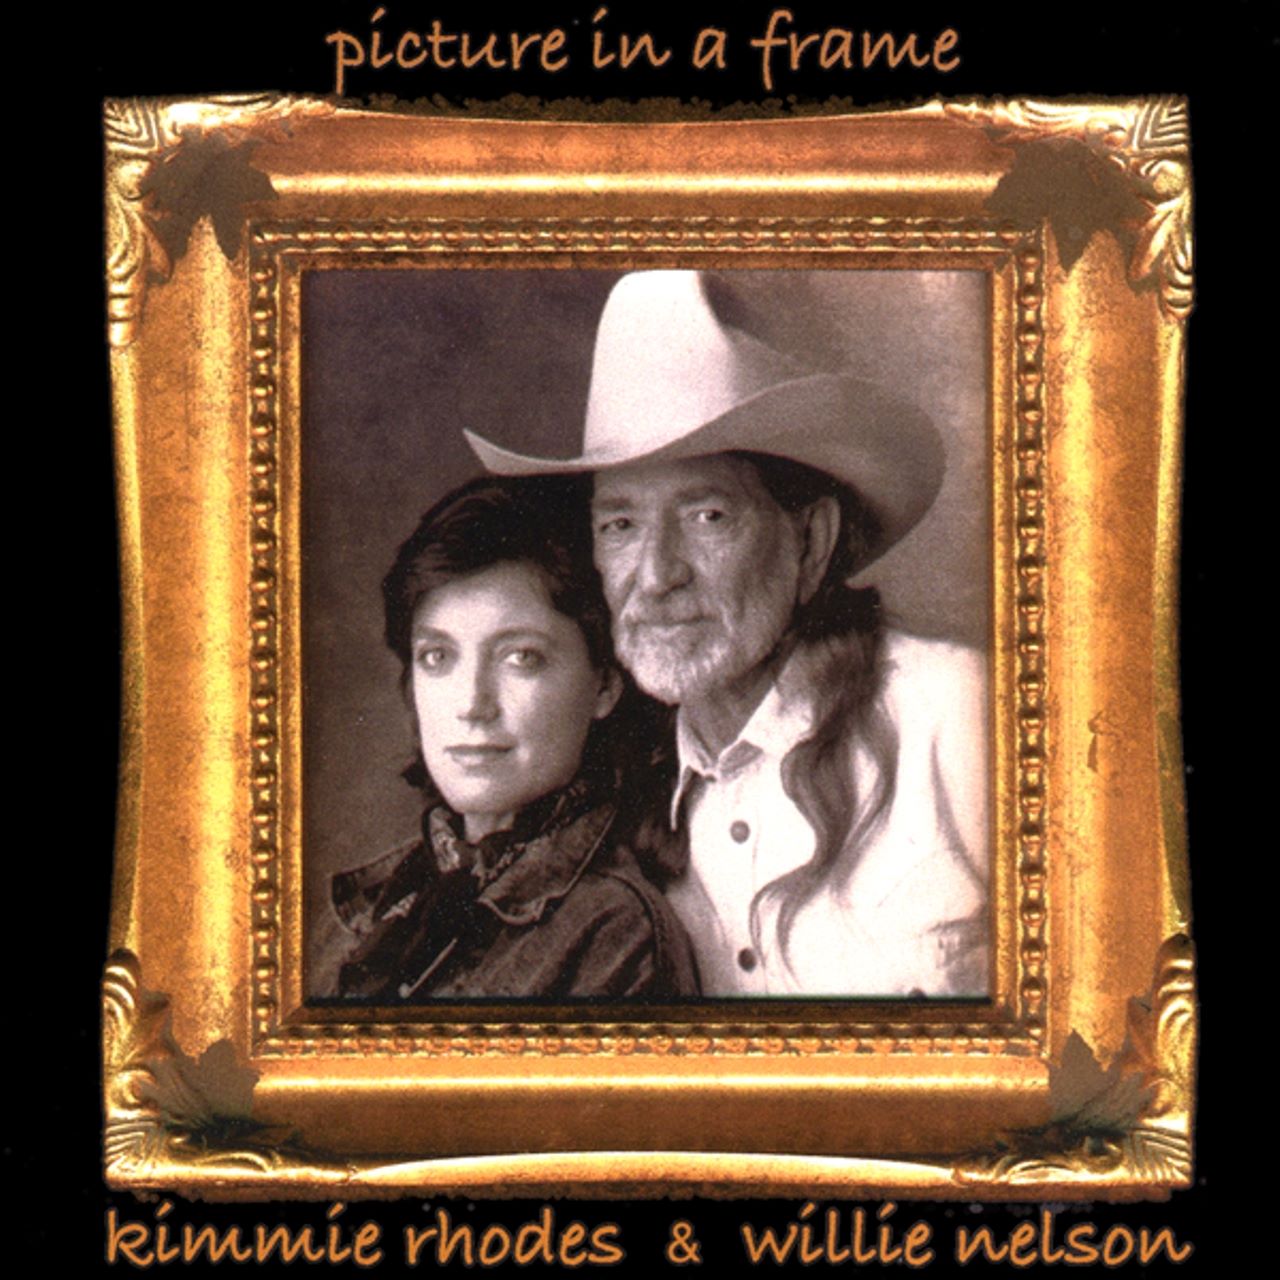 Kimmie Rhodes - Picture In A Frame cover album